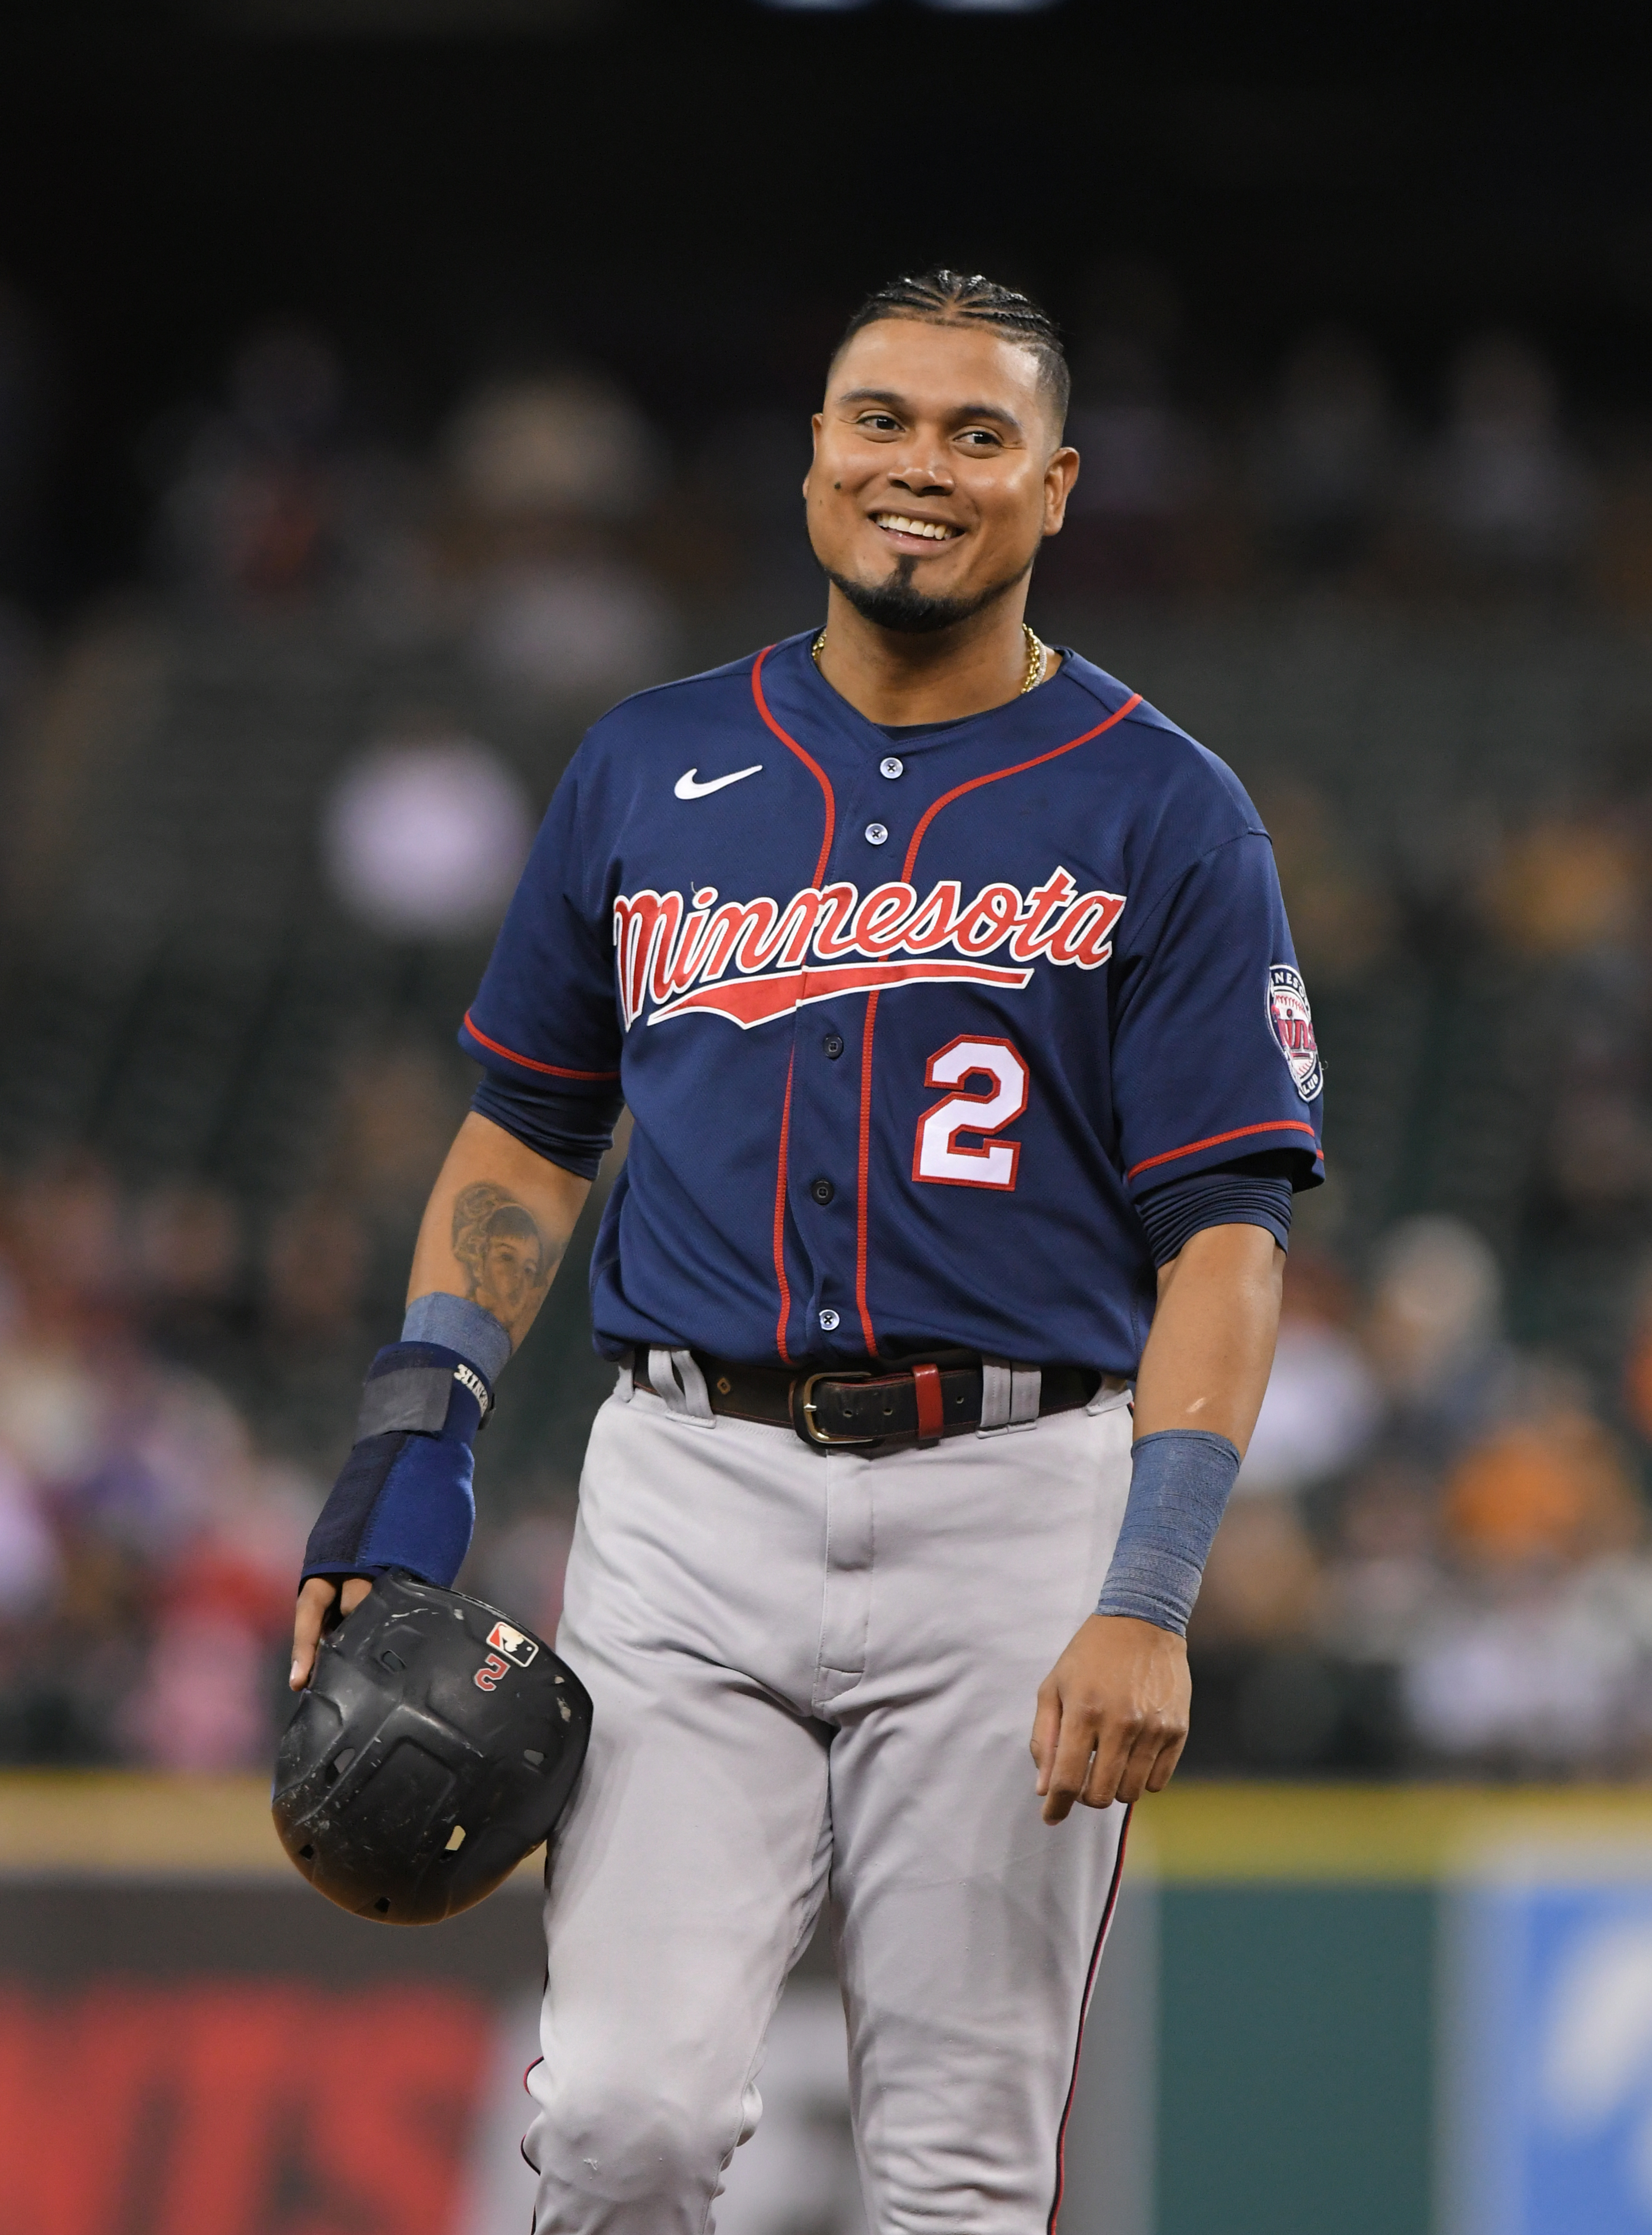 Luis Arraez #2 of the Minnesota Twins looks on and smiles during the game against the Detroit Tigers at Comerica Park on October 1, 2022 in Detroit, Michigan. The Tigers defeated the Twins 3-2.